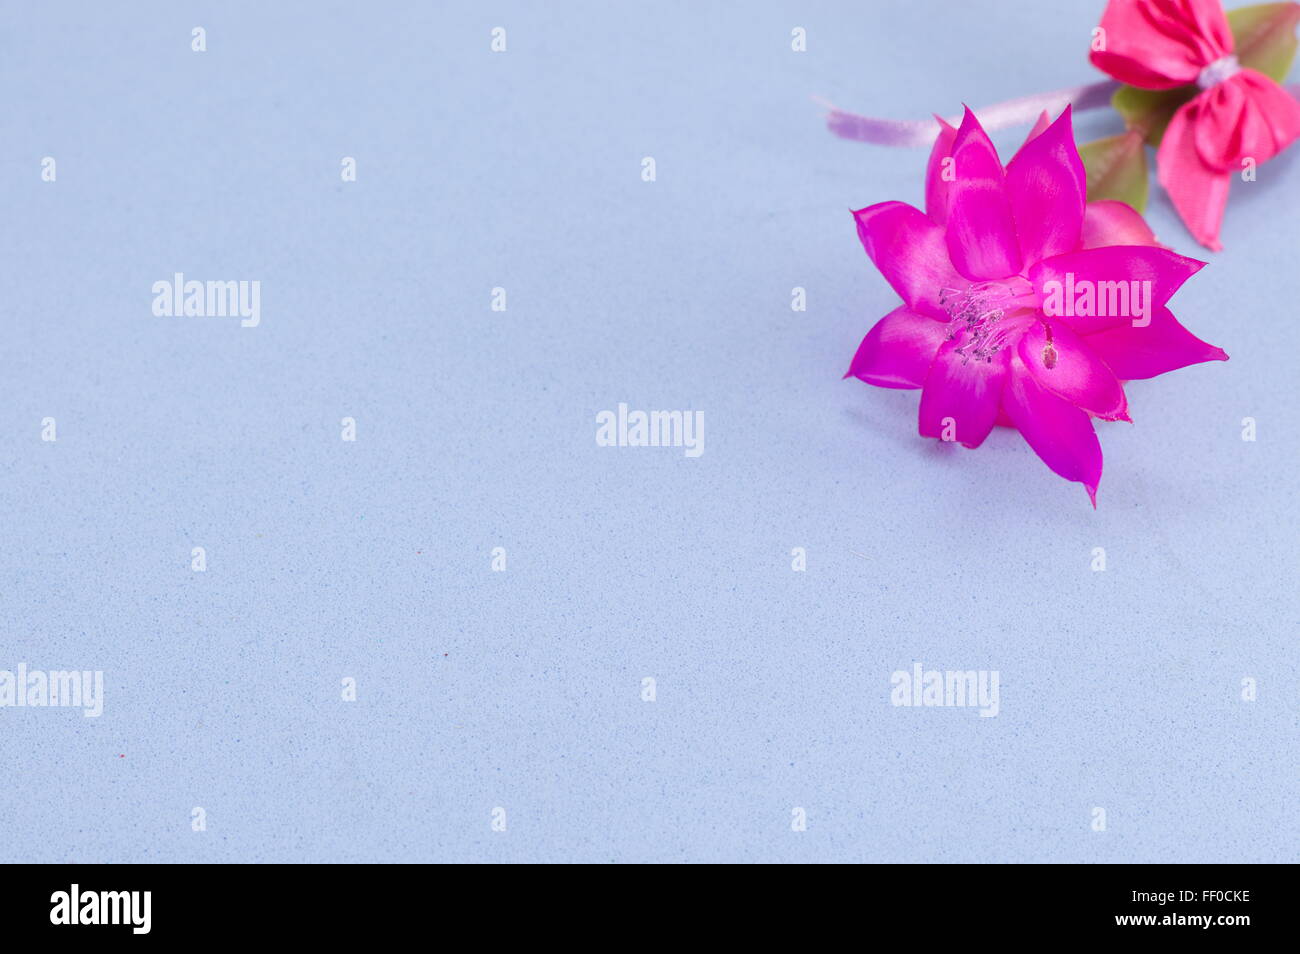 Gorgeous pink cactus  flower on blue background Stock Photo